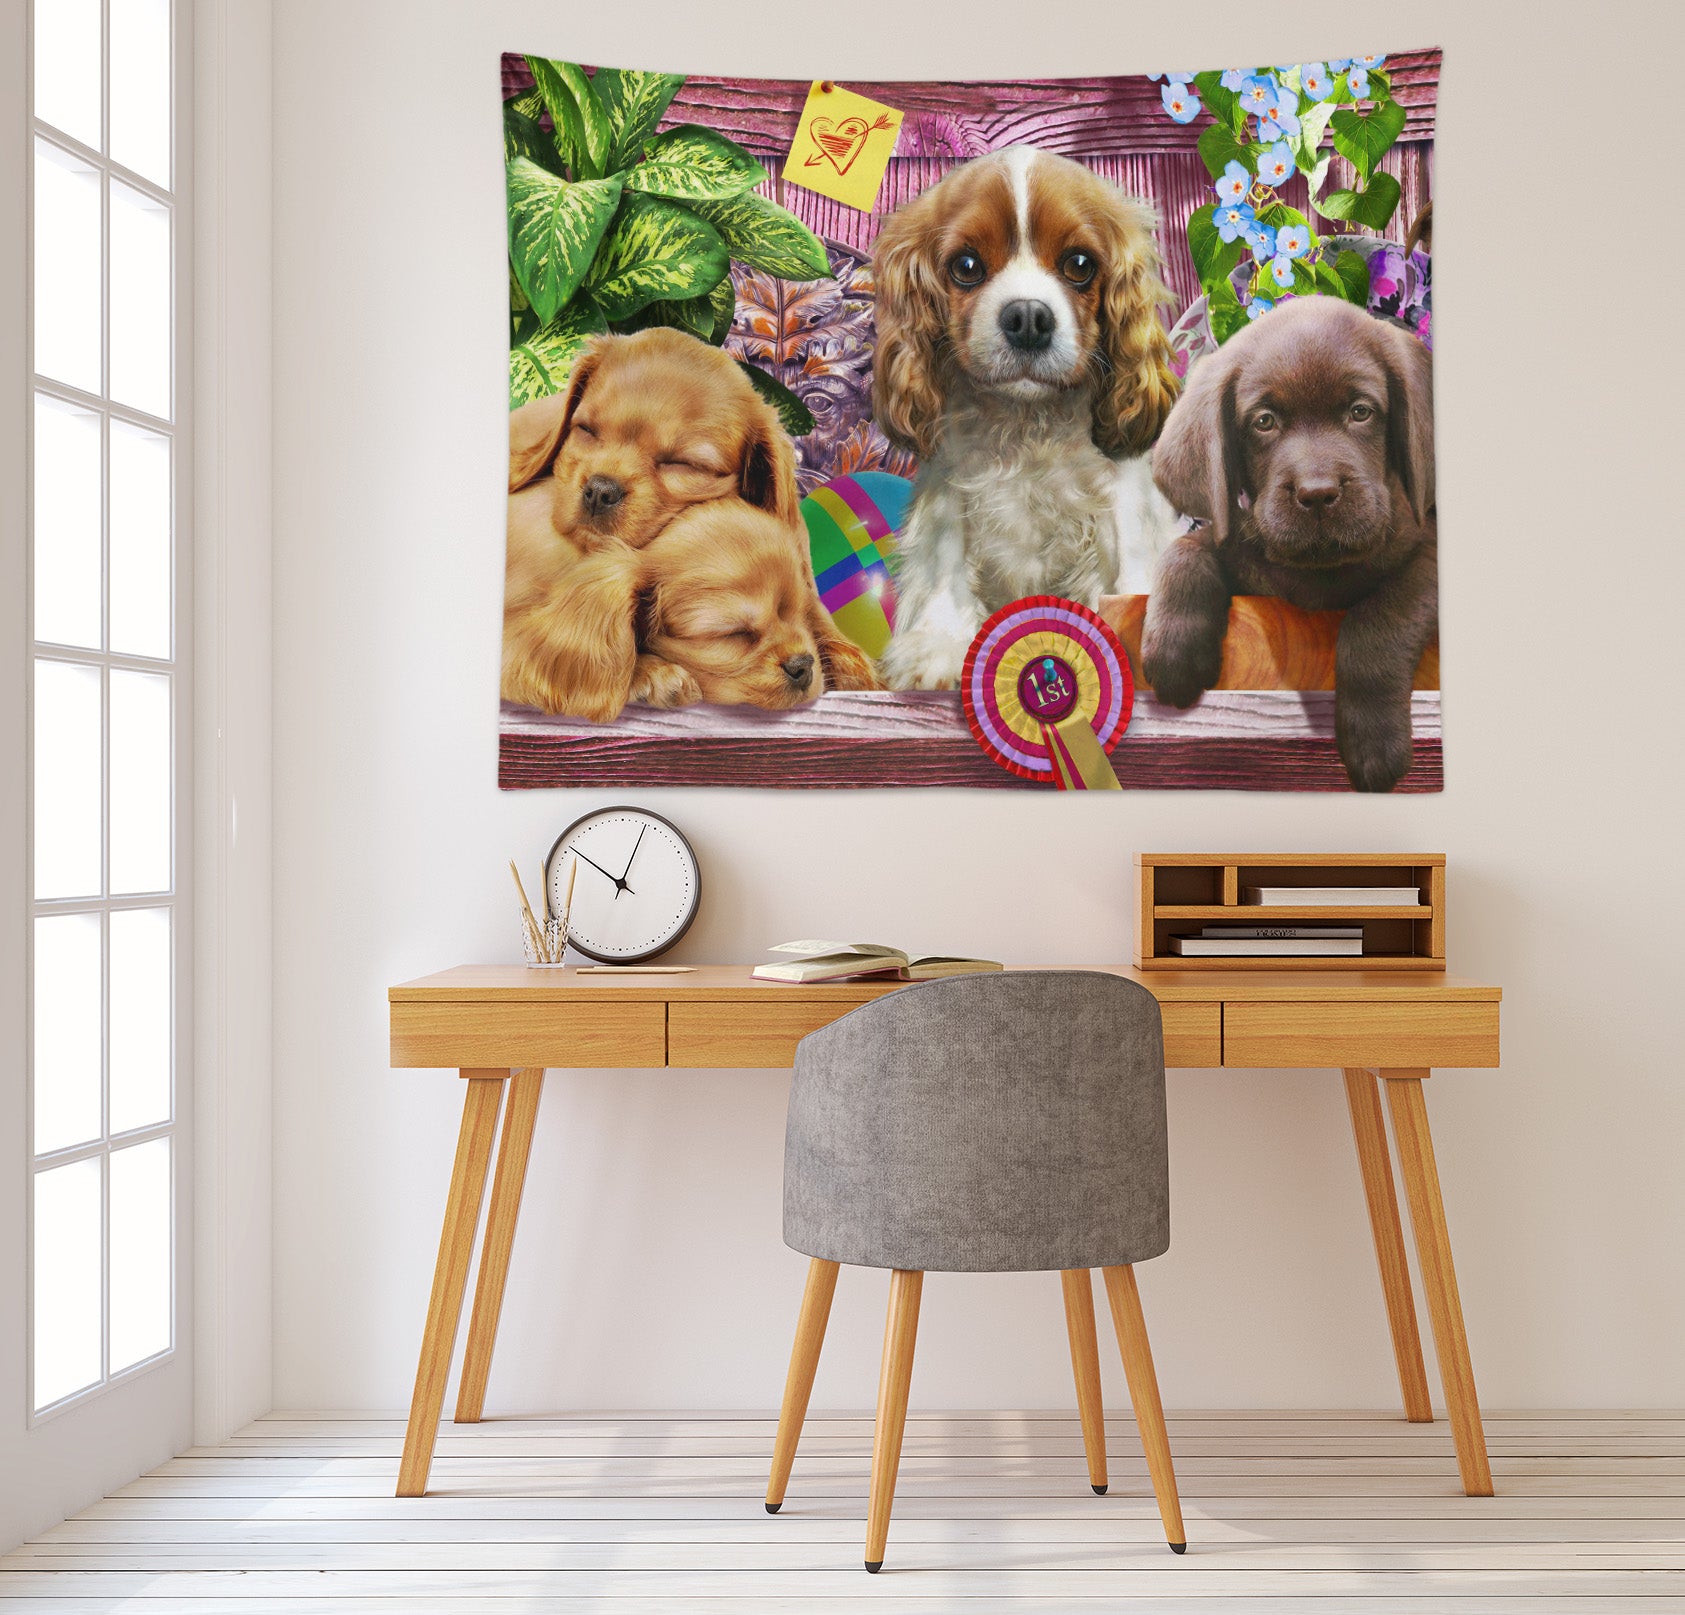 3D Cute Pet Dog 706 Adrian Chesterman Tapestry Hanging Cloth Hang